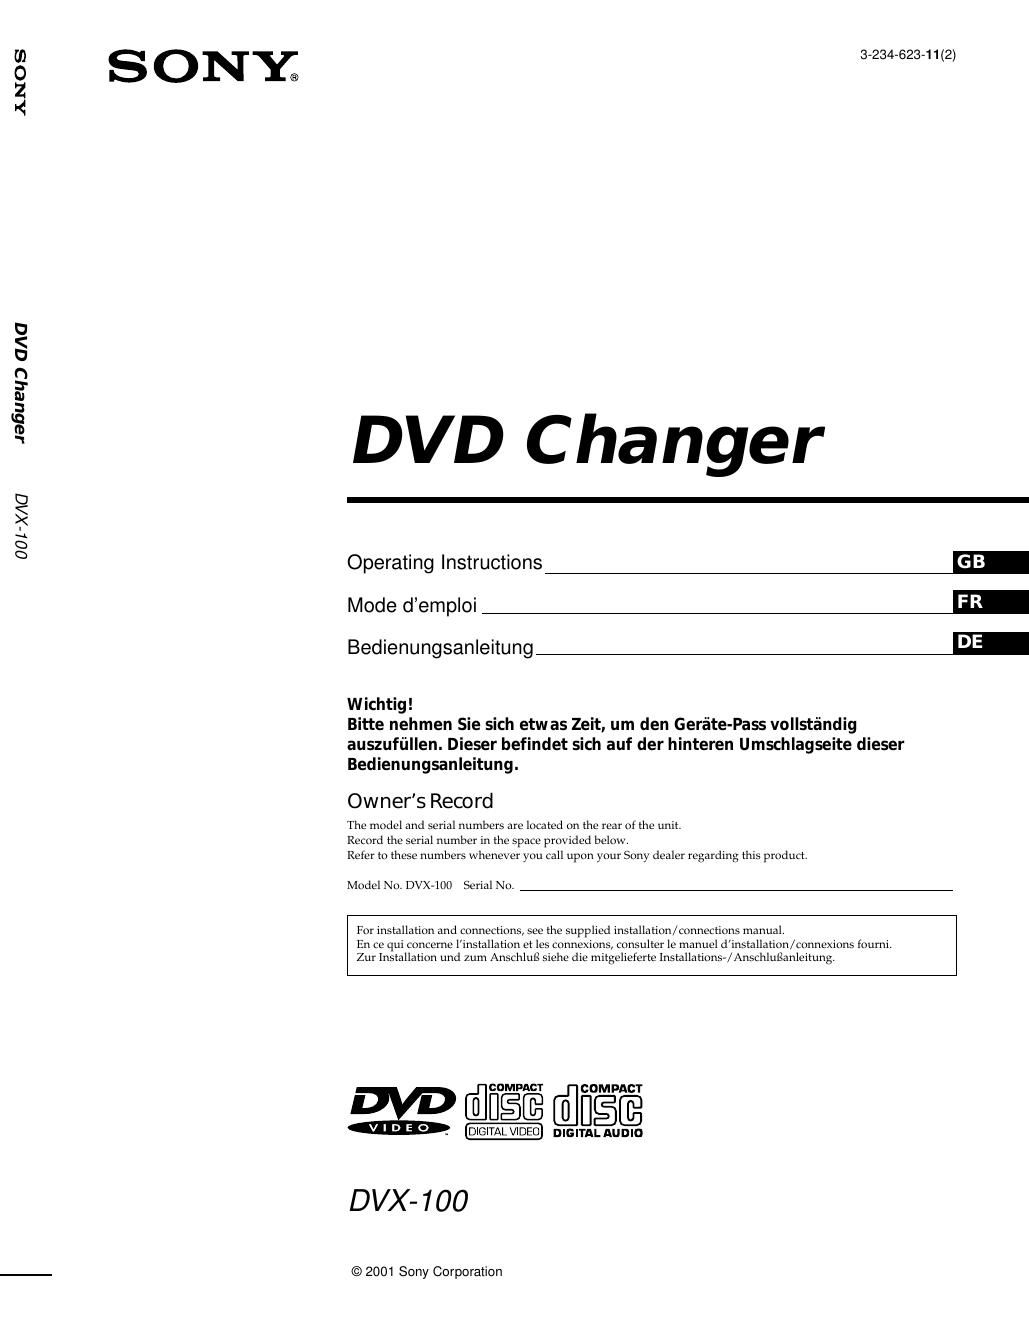 sony dvx 100 owners manual